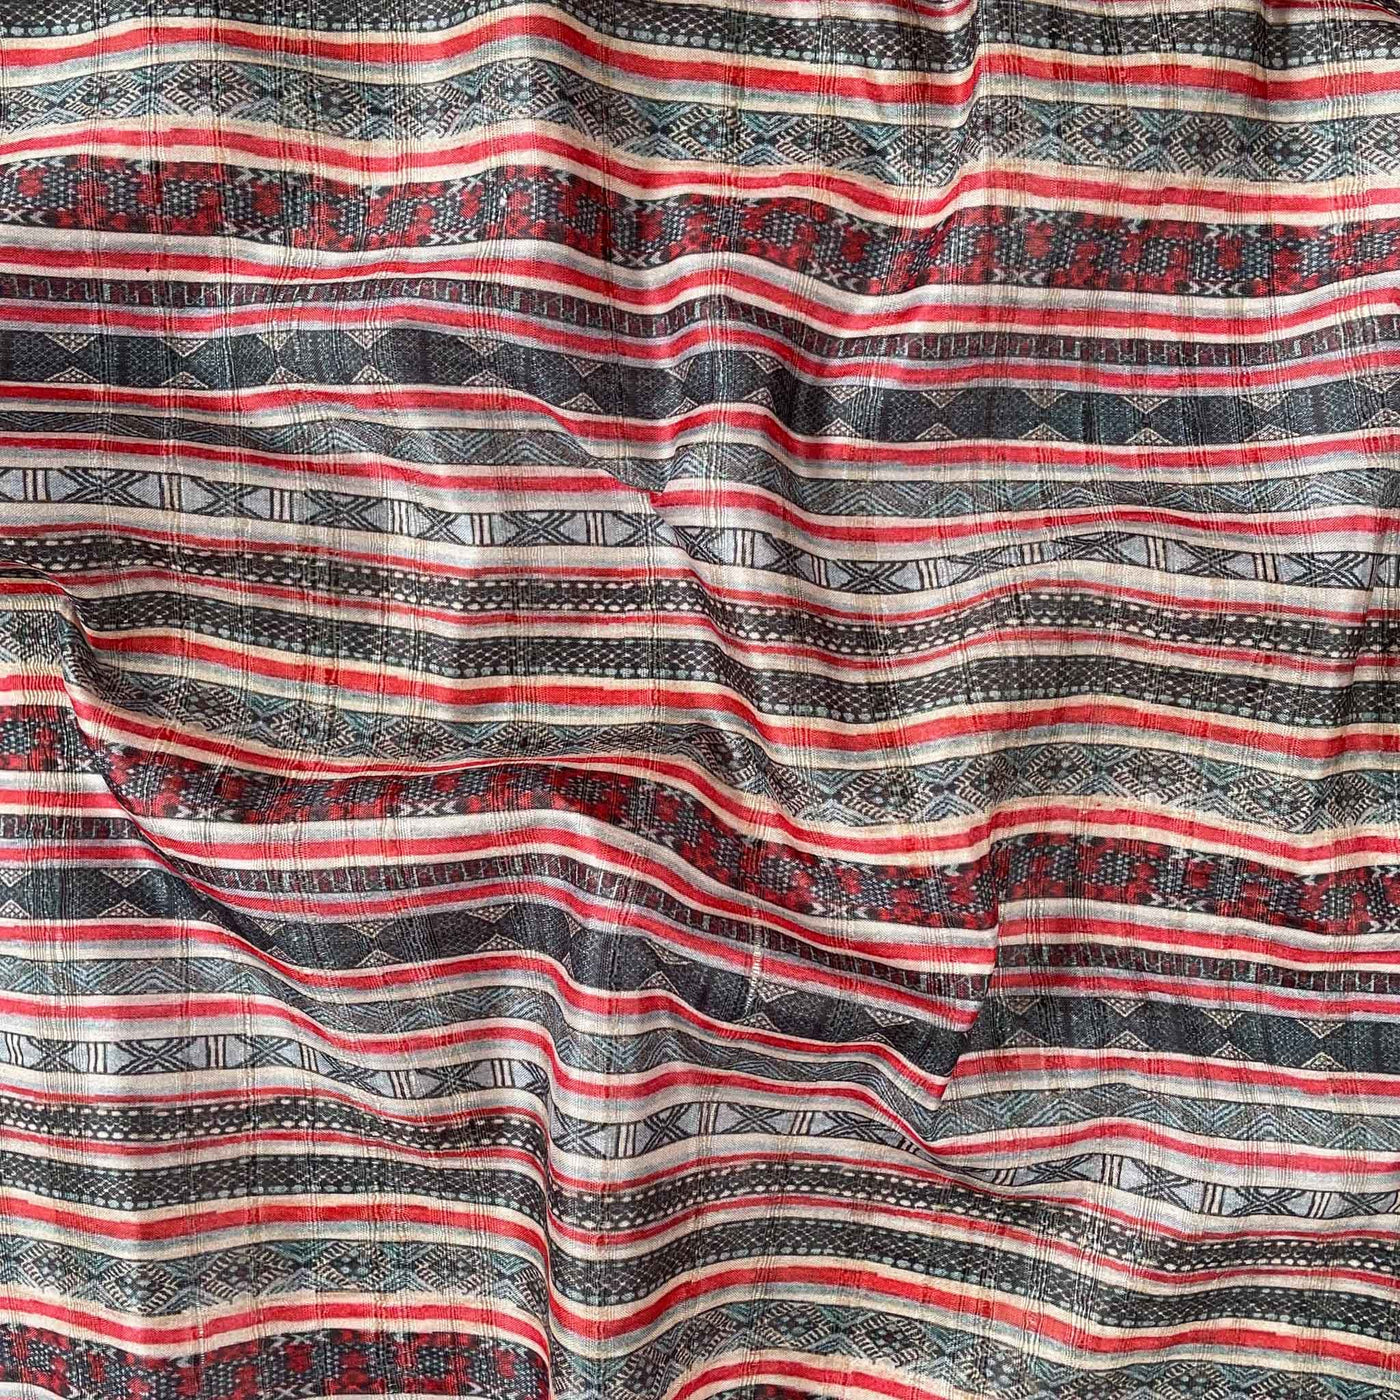 Fabric Pandit Cut Piece (CUT PIECE) Red and Black Tribal African Art Digital Printed Tussar Silk Fabric (Width 44 Inches)